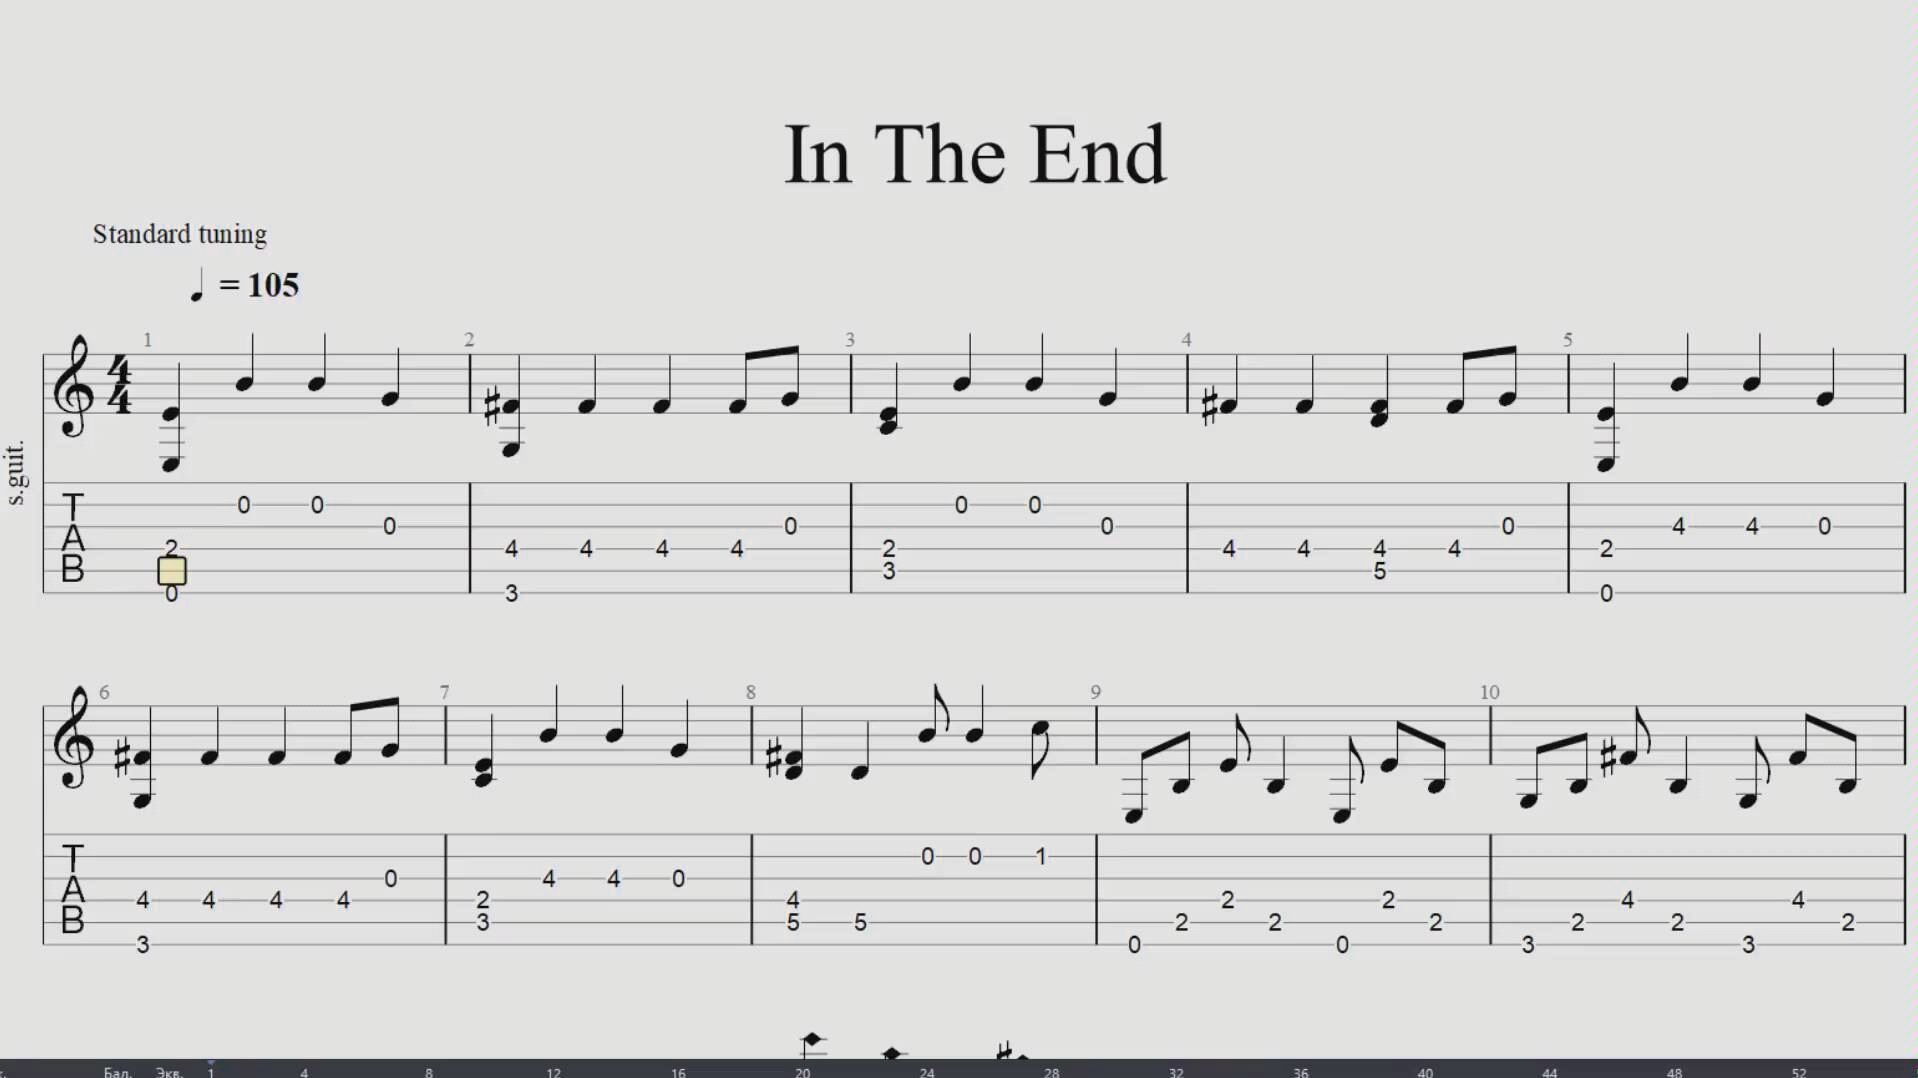 Linkin park-In The End Sheet Music pdf, - Free Score Download ★